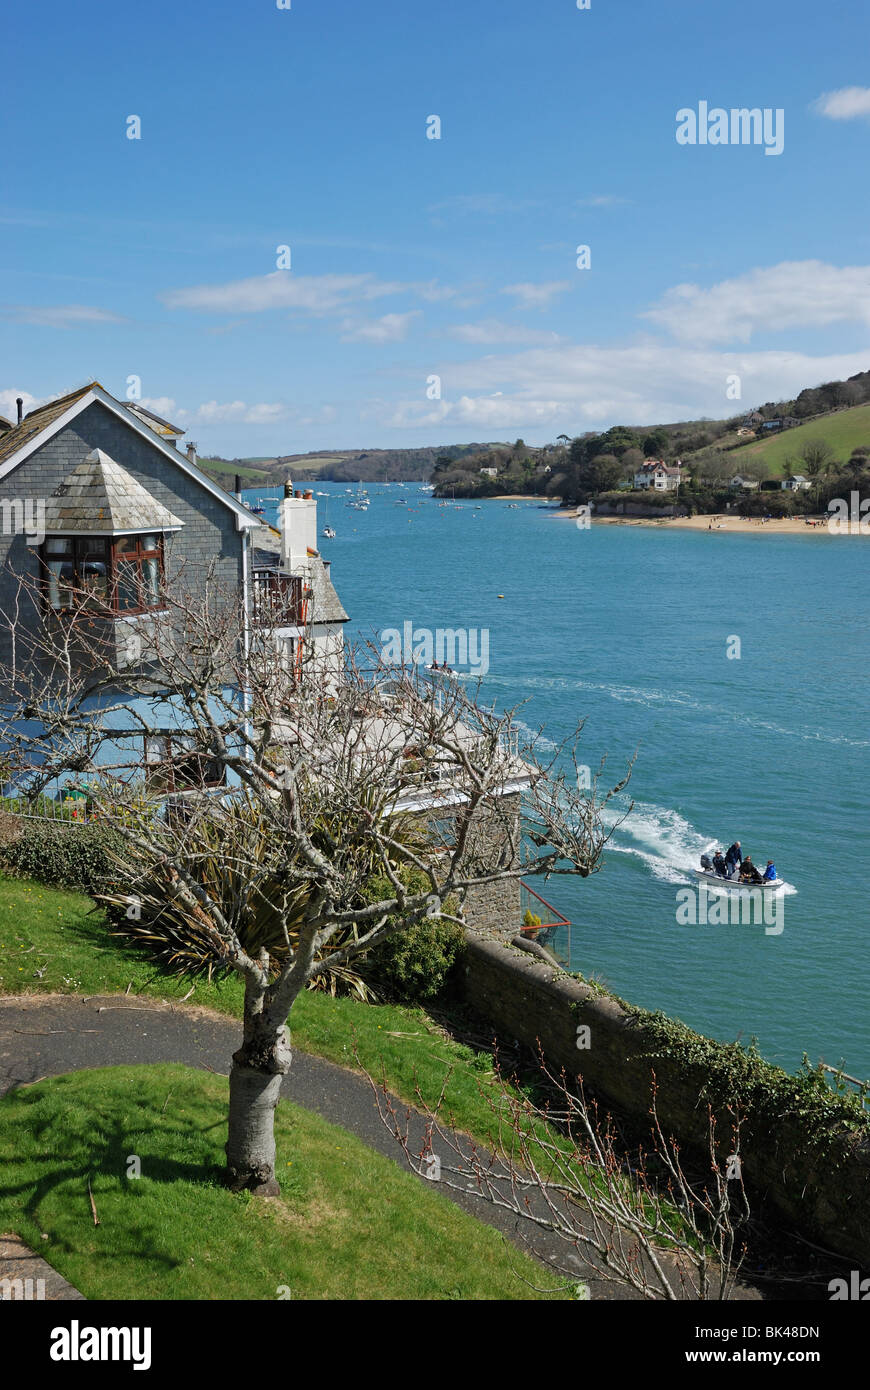 A terrace overlooking the estuary at Salcombe, South Devon, England. Stock Photo